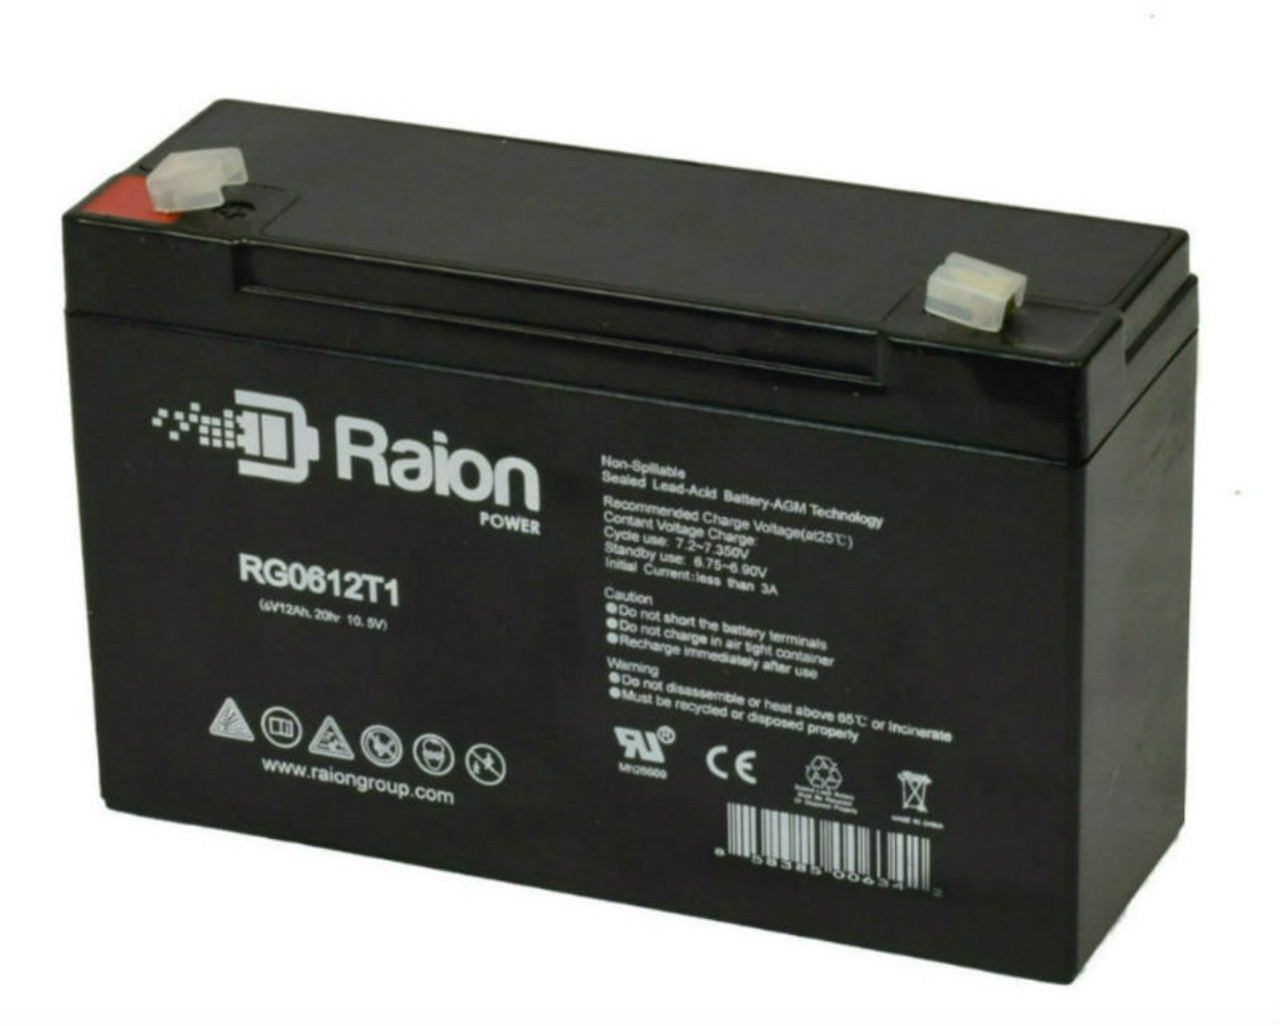 Raion Power RG06120T1 Replacement Battery for Teledyne 2CL6S16